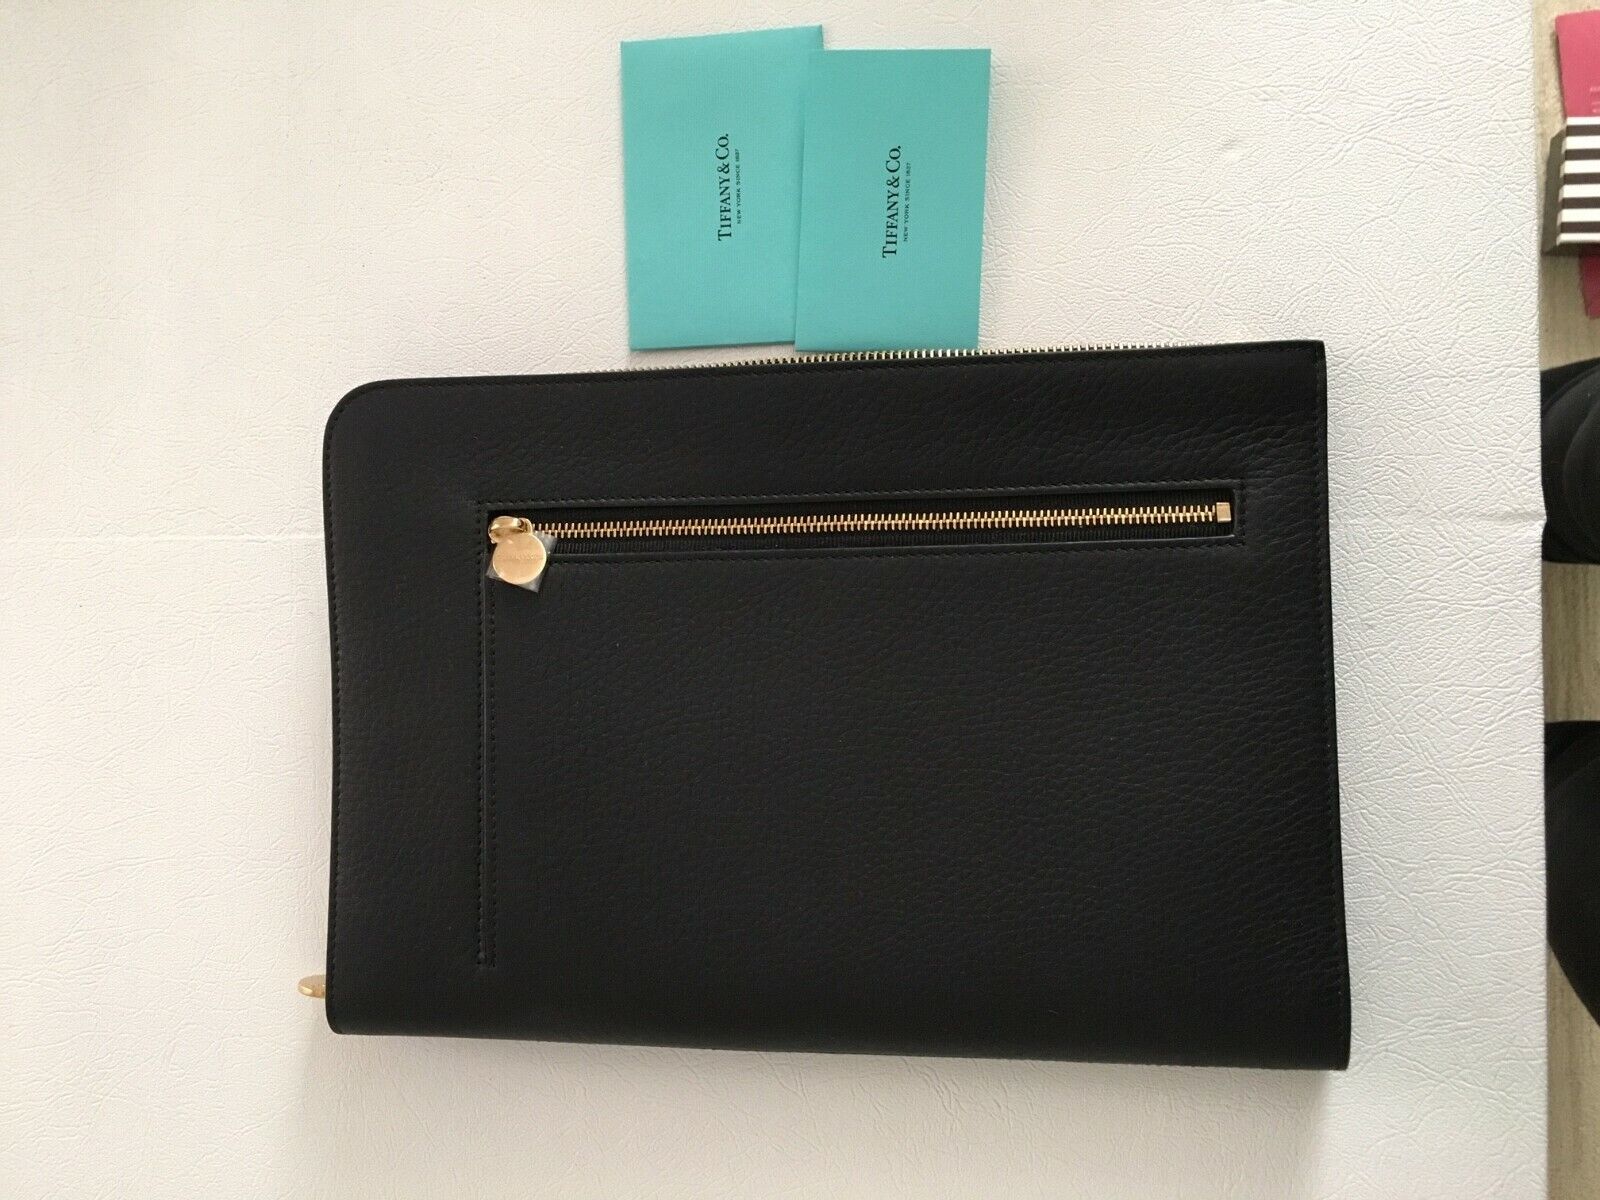 Tiffany & Co Black Leather Case Tablet Ipad Document Holder l 100% authentic